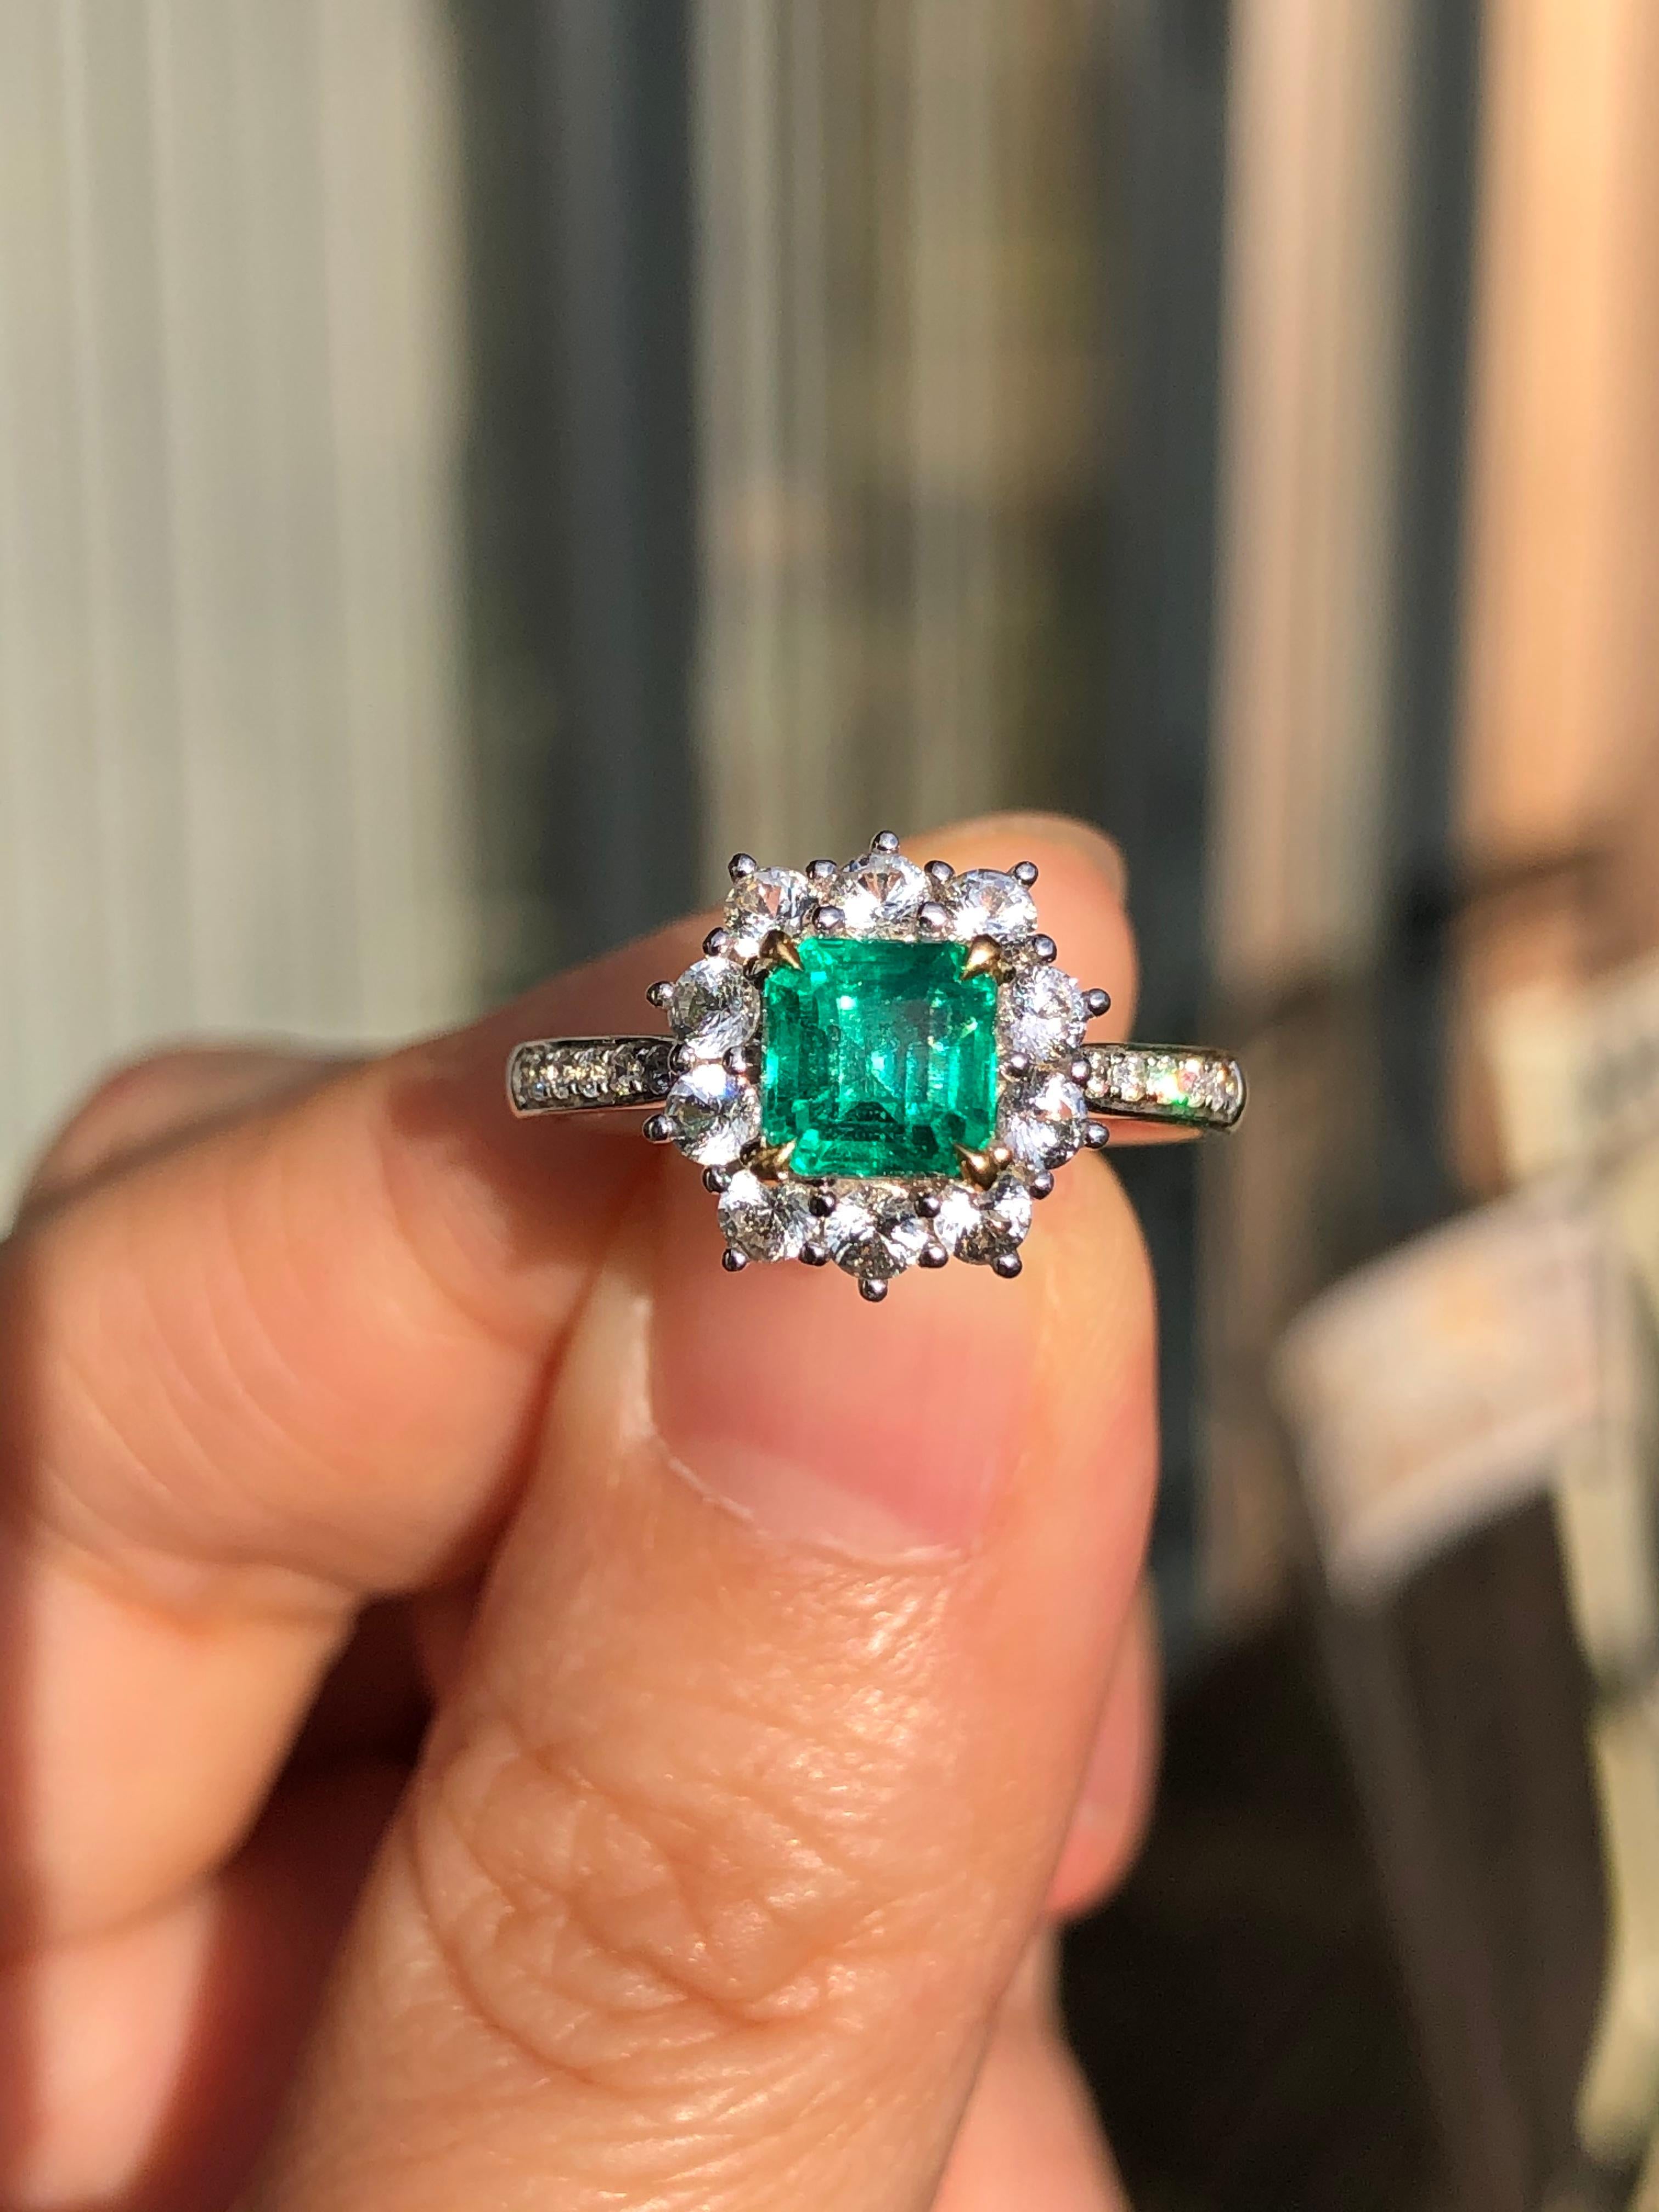 A beautiful Emerald and diamond cluster ring. The emerald is a lovely vivid green emerald and is surrounded by Well-matched white transition cut diamonds.

Dandelion Code: AT-0684
WEIGHT
Approx 2.8g

STONES
Emerald: Approx 1ct
Diamond: 0.75ct

METAL